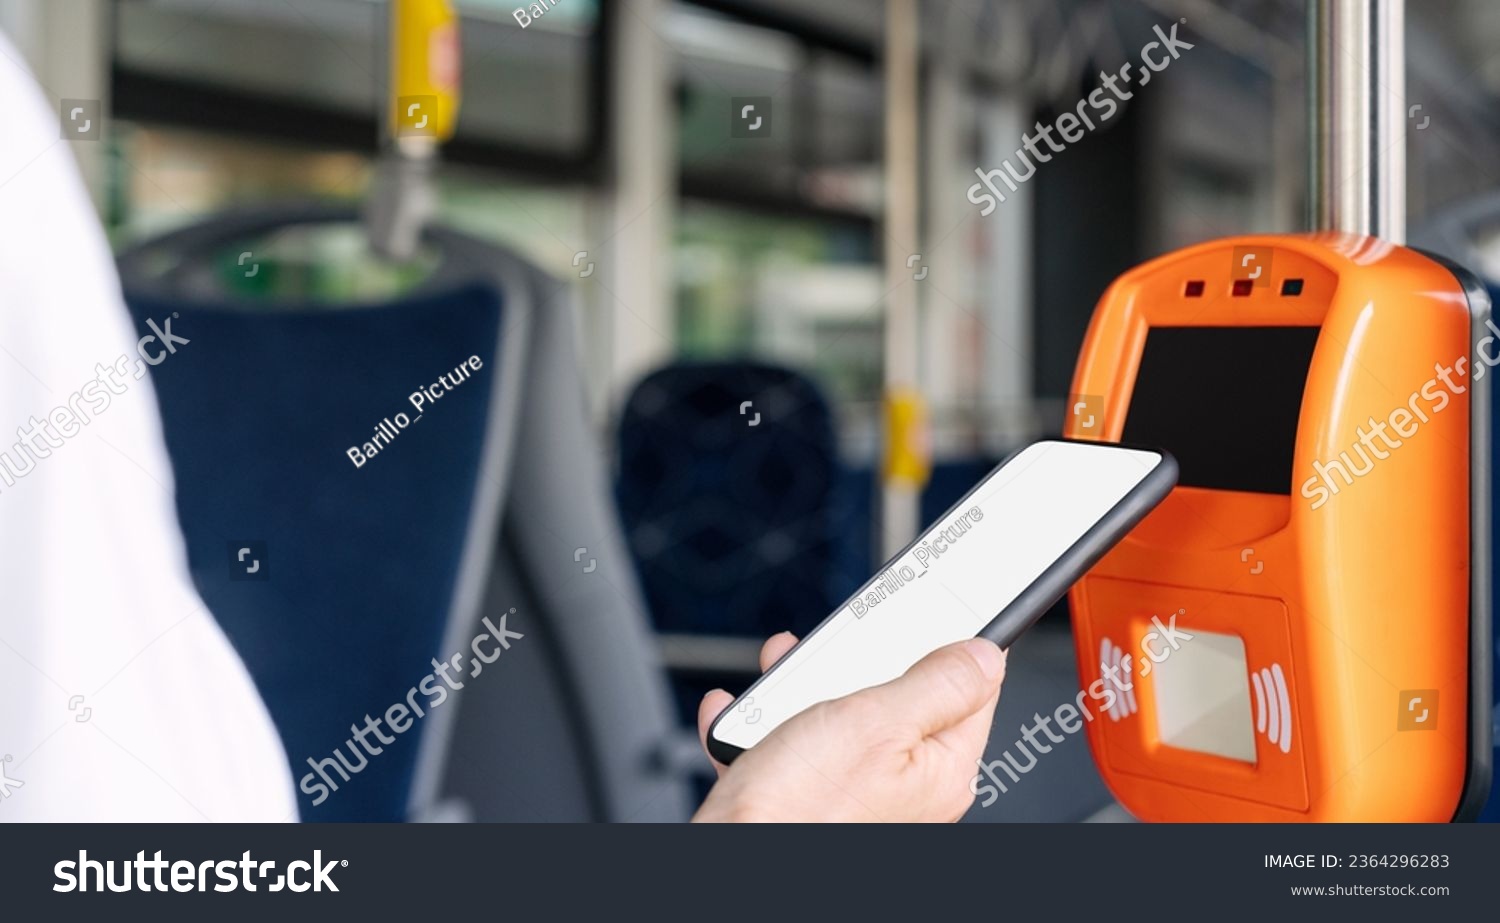 Mobile payment concept, smart phone with empty screen in females hand pays bus travel using contactless technology of phone. #2364296283